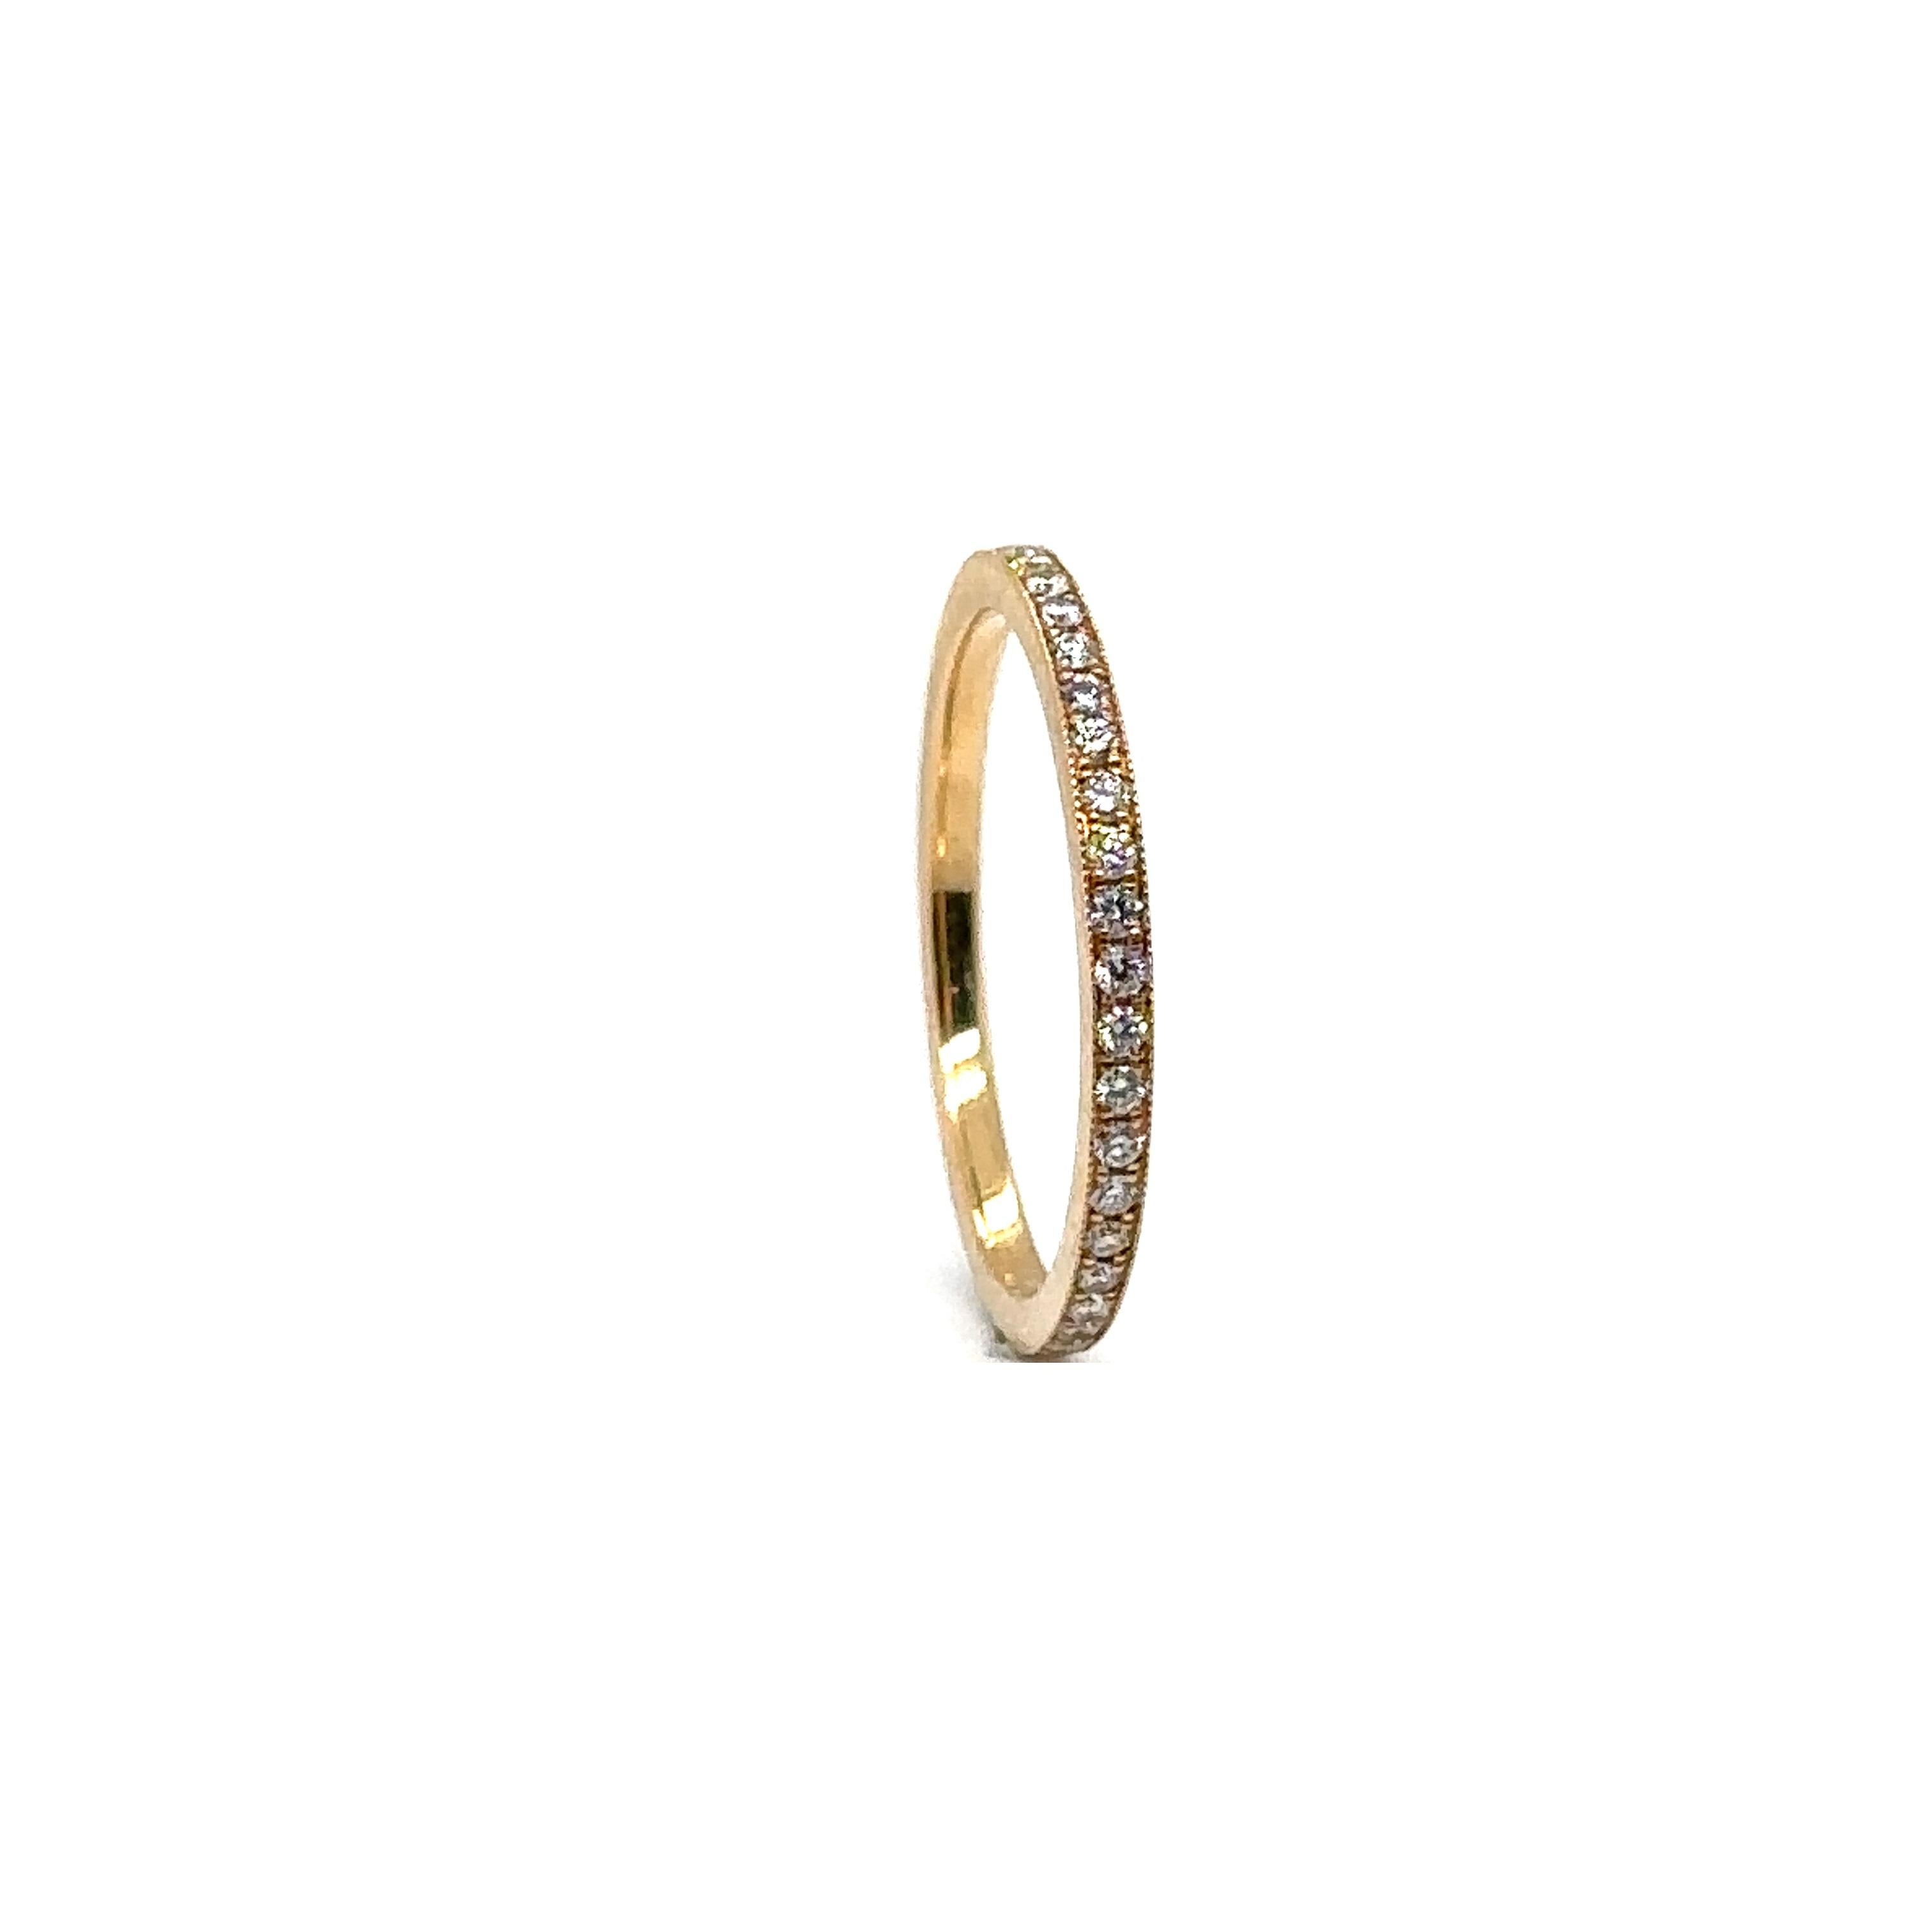 WB-1.7-43 - 18K YELLOW GOLD WEDDING BAND with DIAMONDS In New Condition For Sale In New York, NY